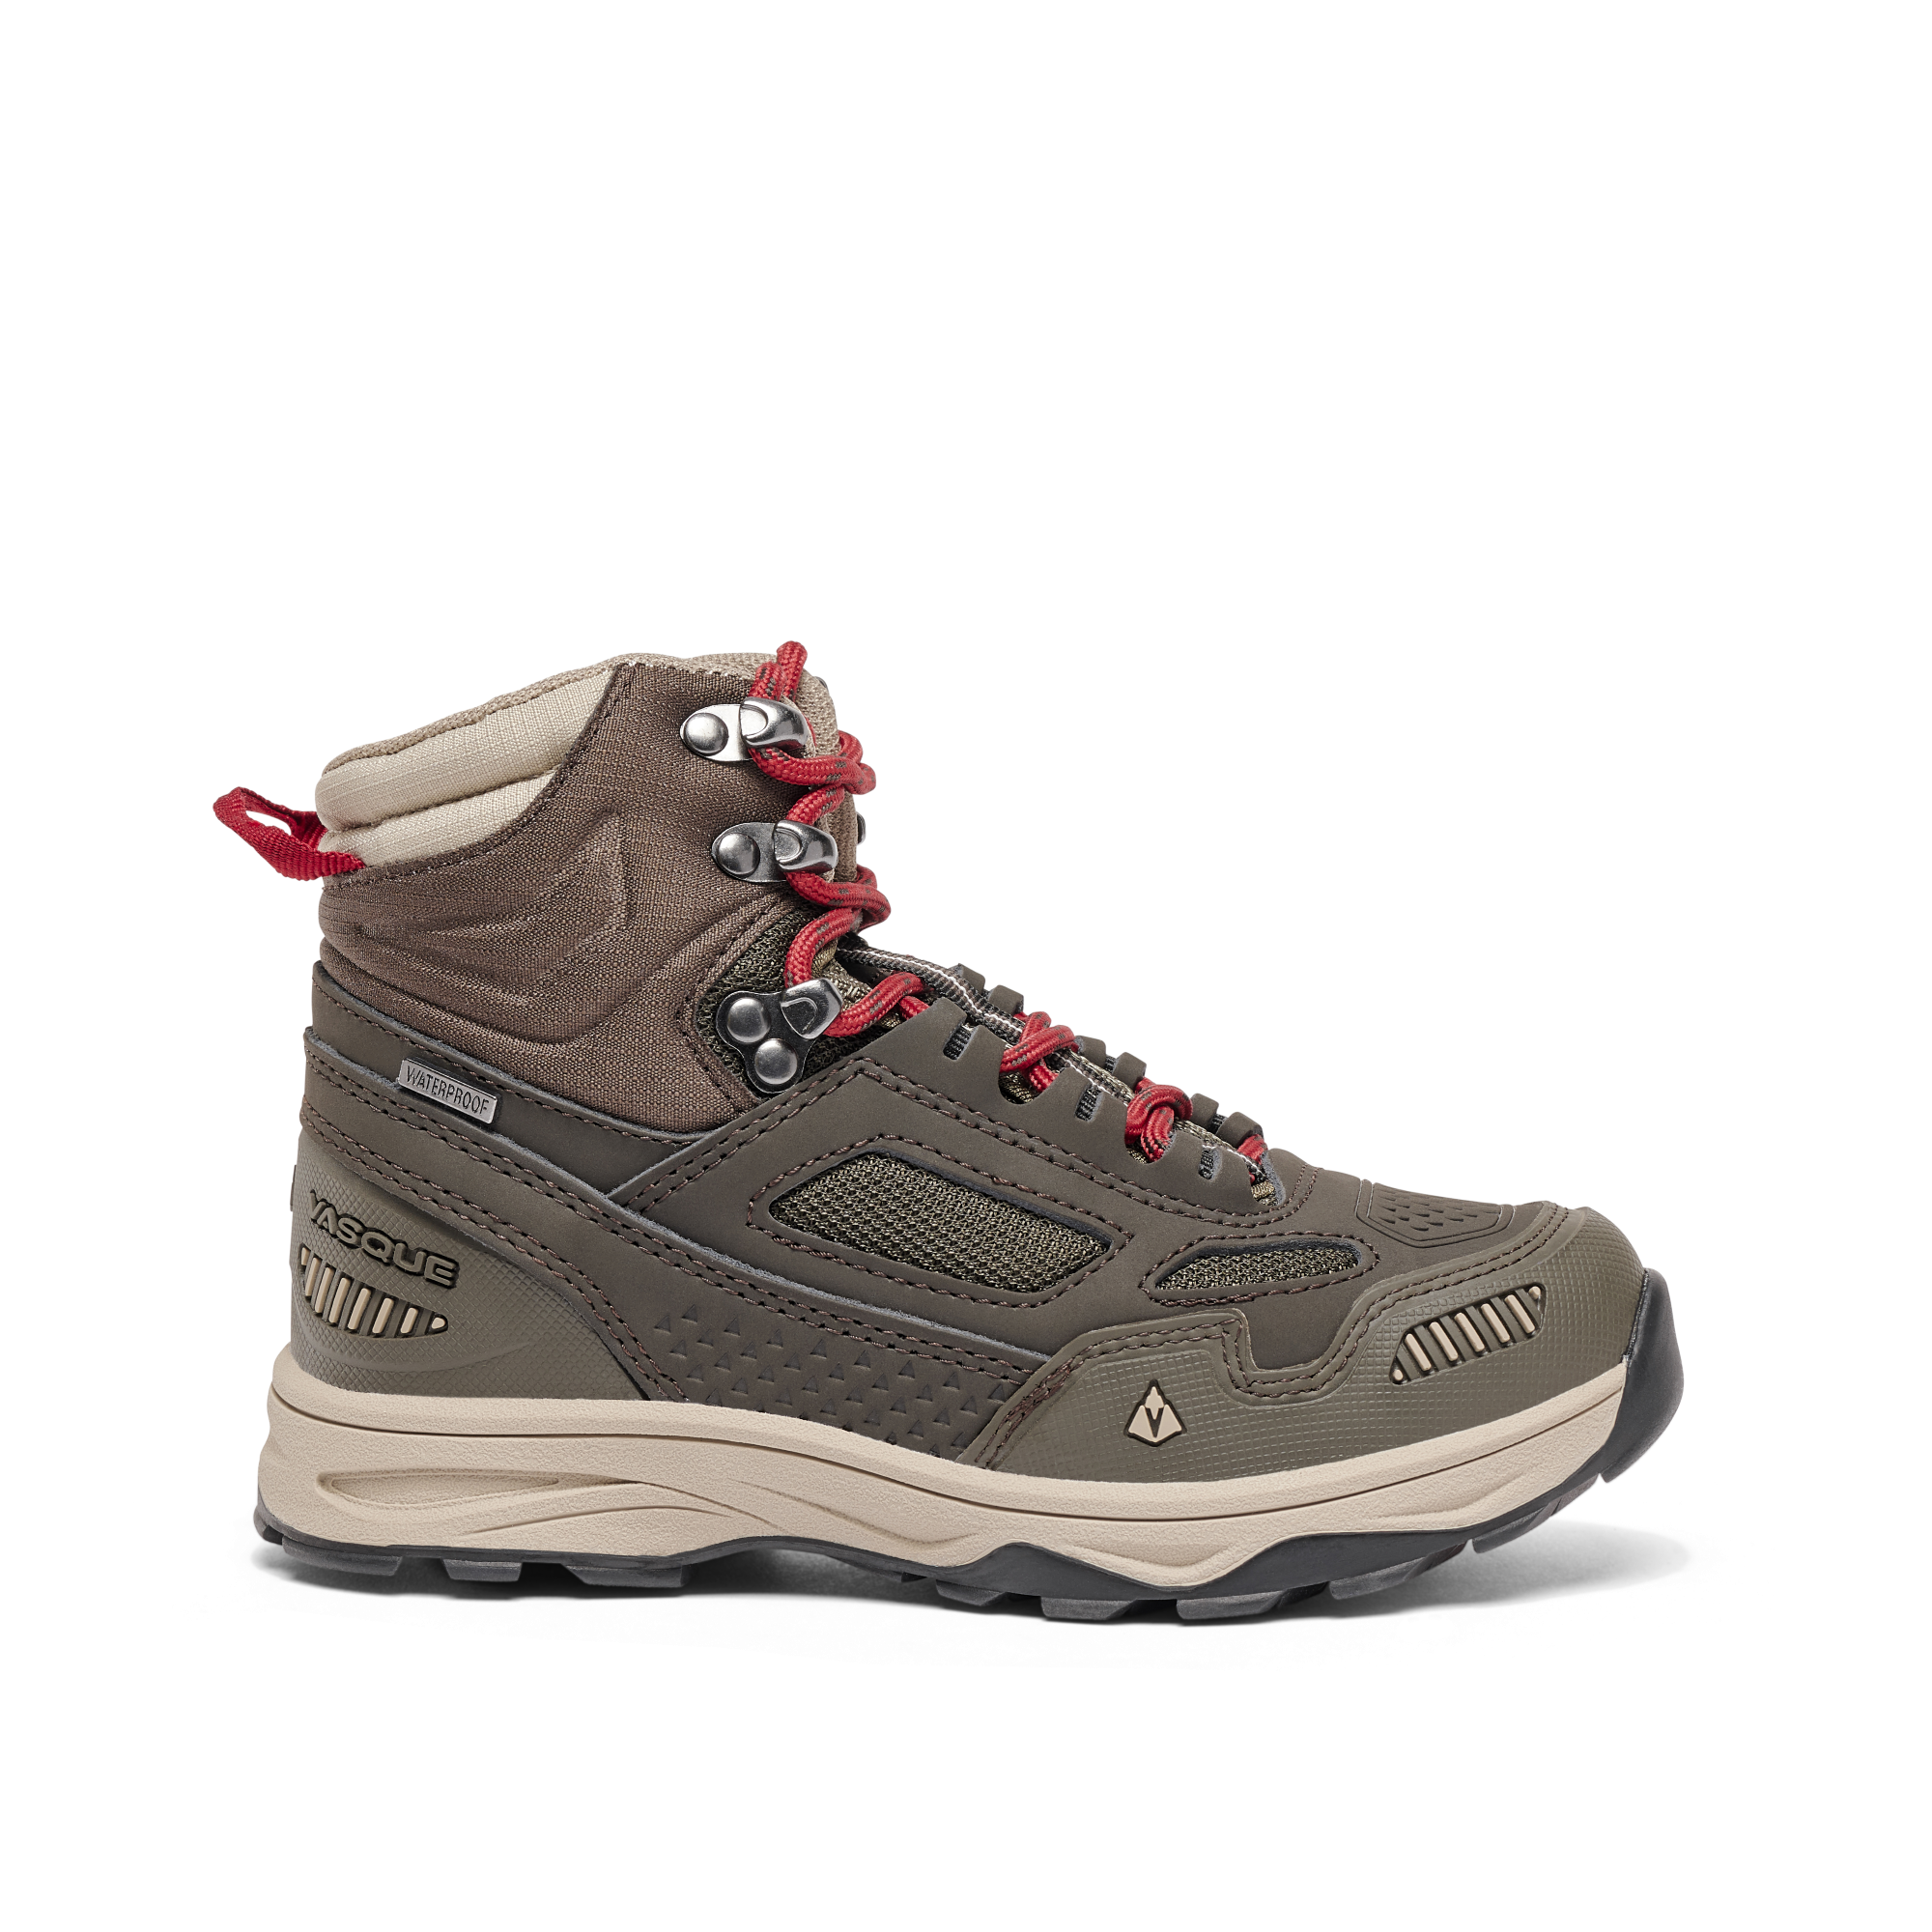 Vasque Breeze AT UltraDry Waterproof Hiking Boots for Kids